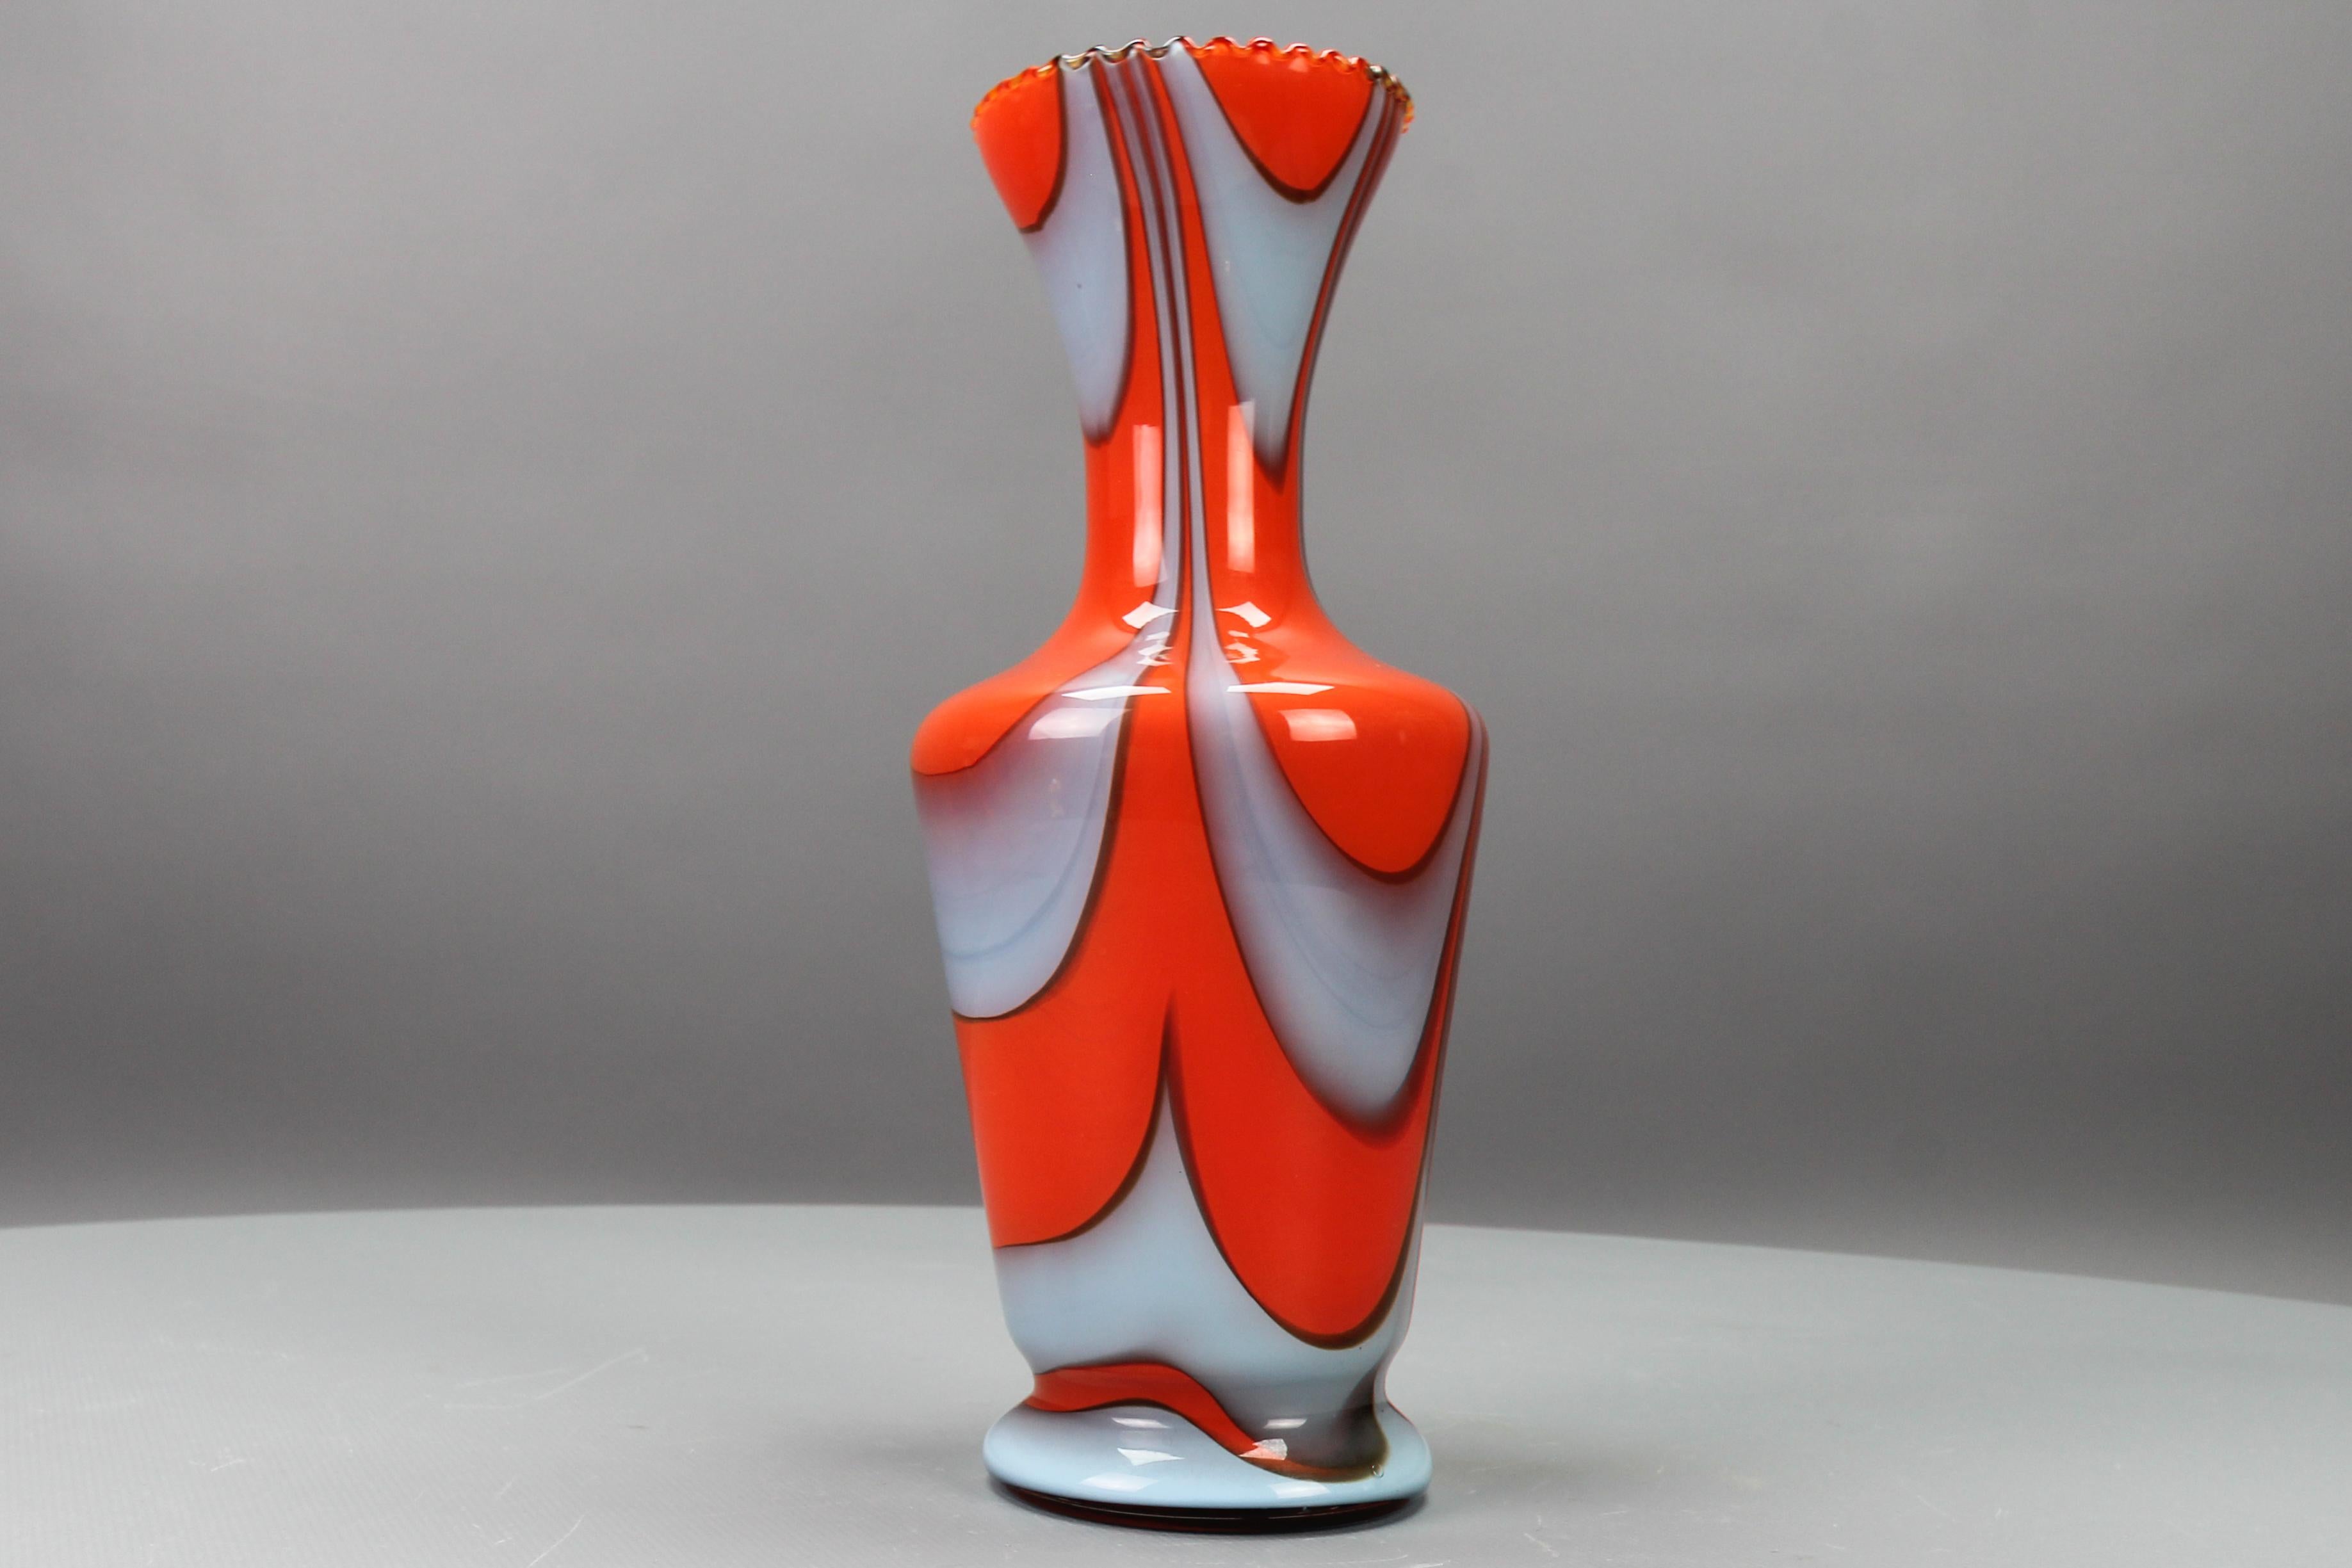 Italian Opaline Florence glass vase in red and grey attributed to Vetreria Barbieri, circa the 1970s.
This beautiful Mid-Century Modern period hand-blown vase features a red body with light grey swirls that give it an exquisite appearance. The rim